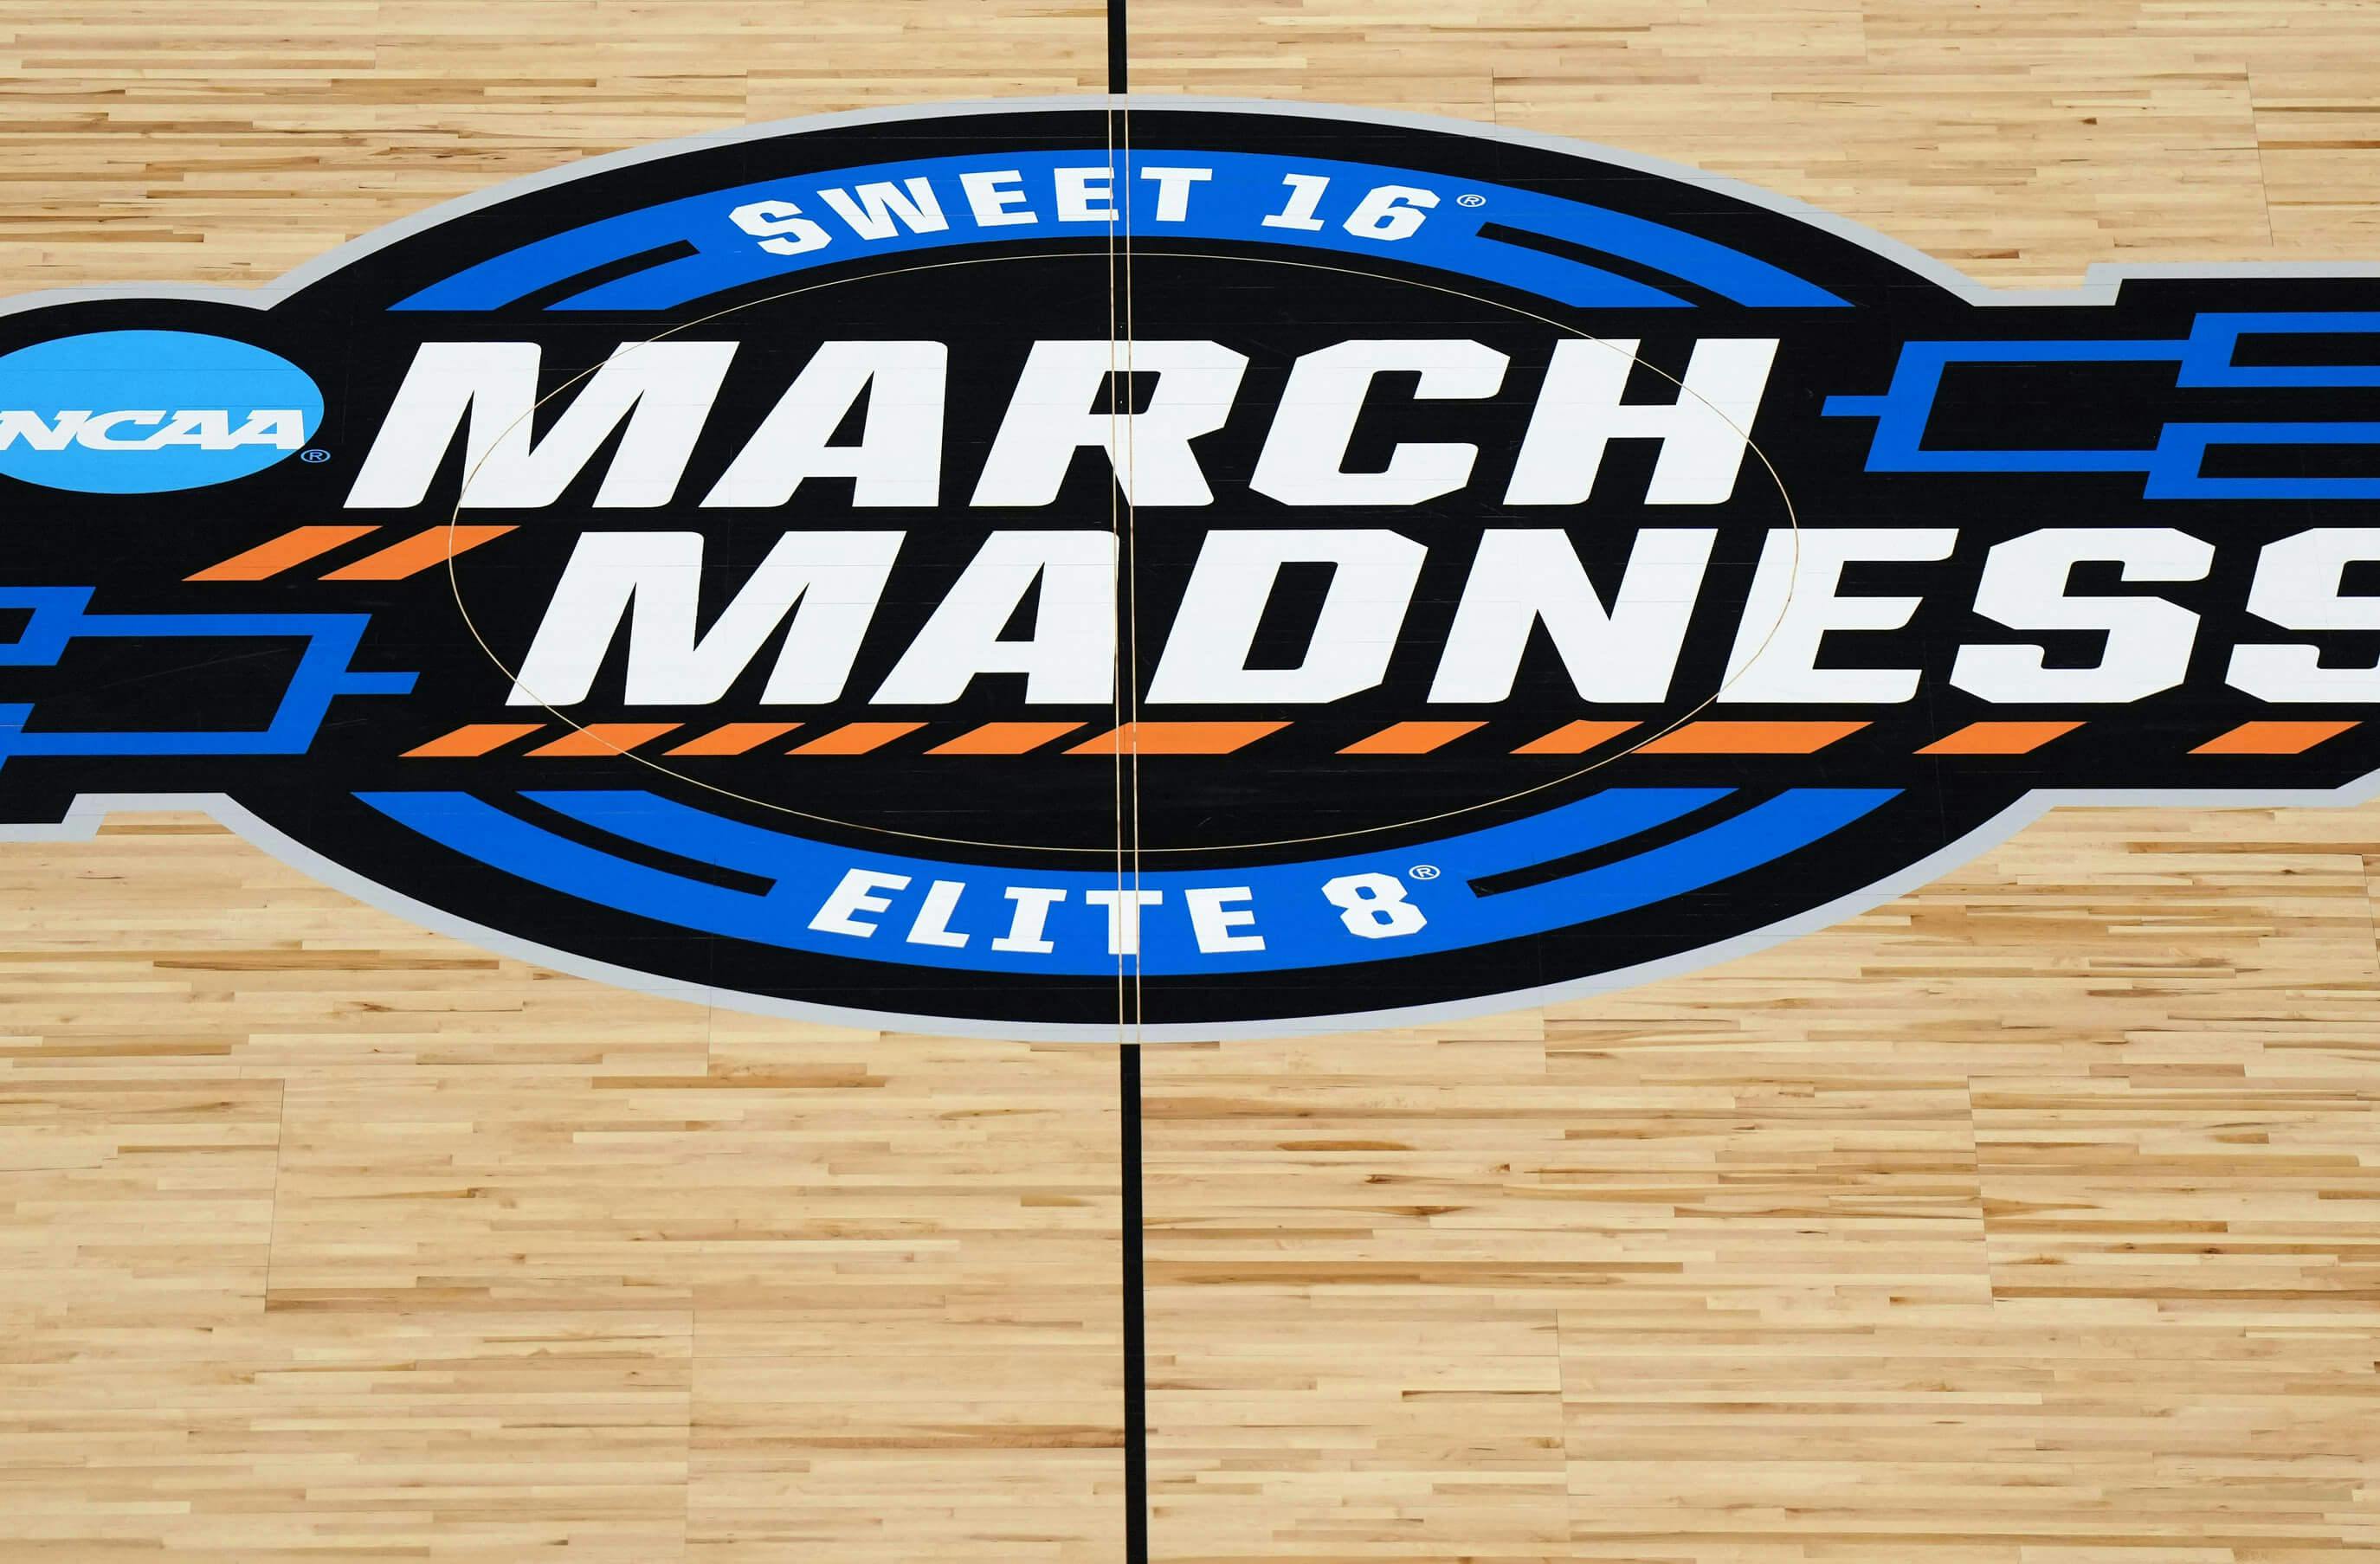 A detailed view of the March Madness center court logo during the first quarter between the Virginia Tech Hokies and the Ohio State Buckeyes at Climate Pledge Arena.